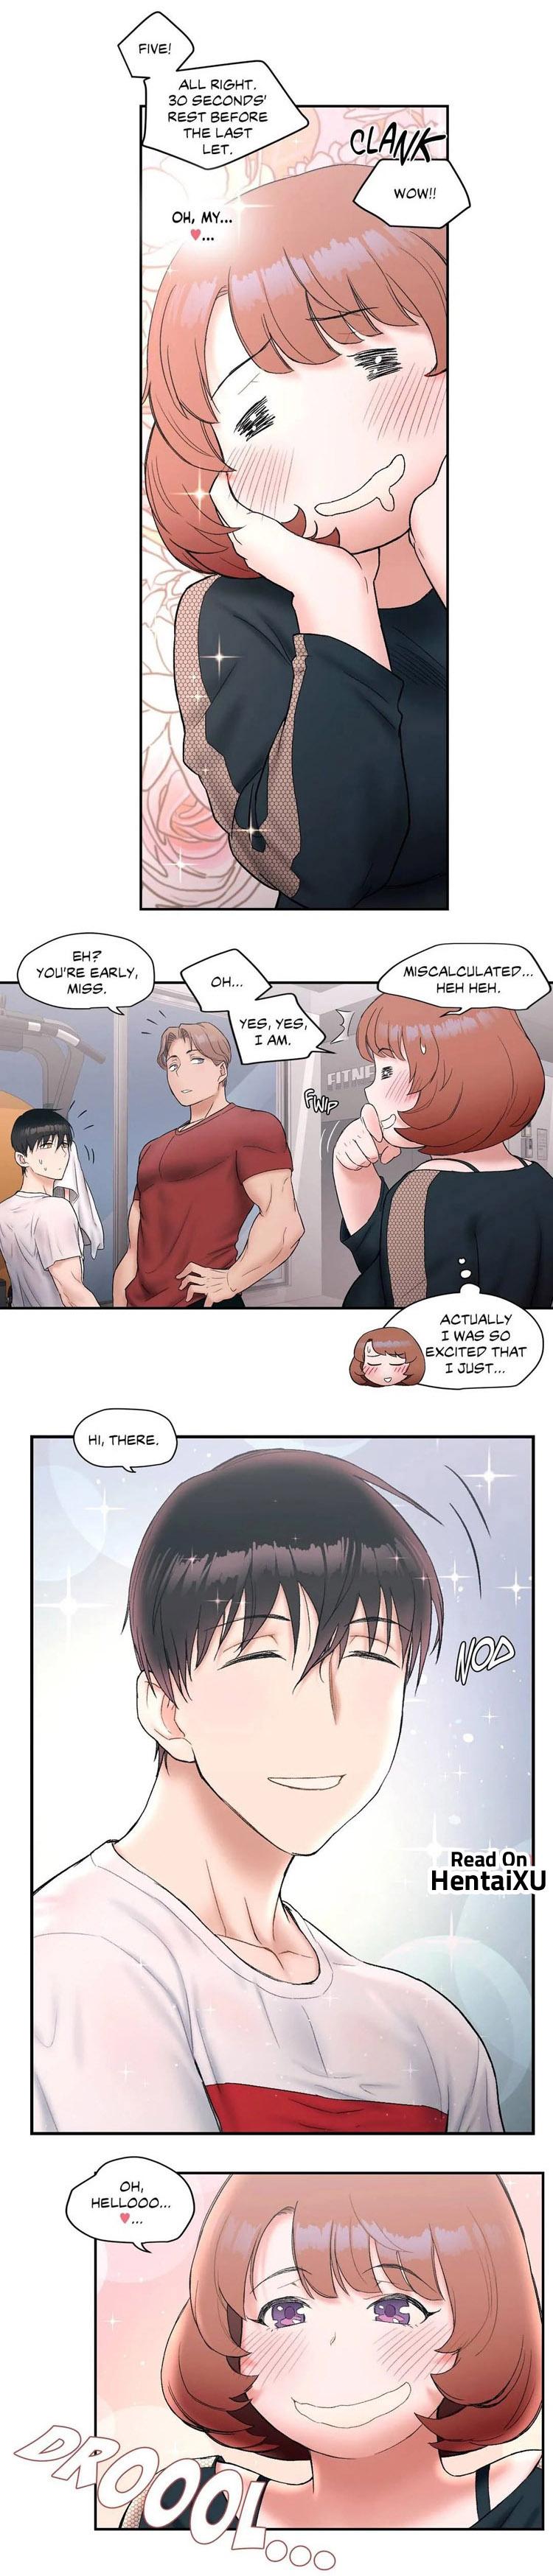 Sexercise Ch.18/? 137